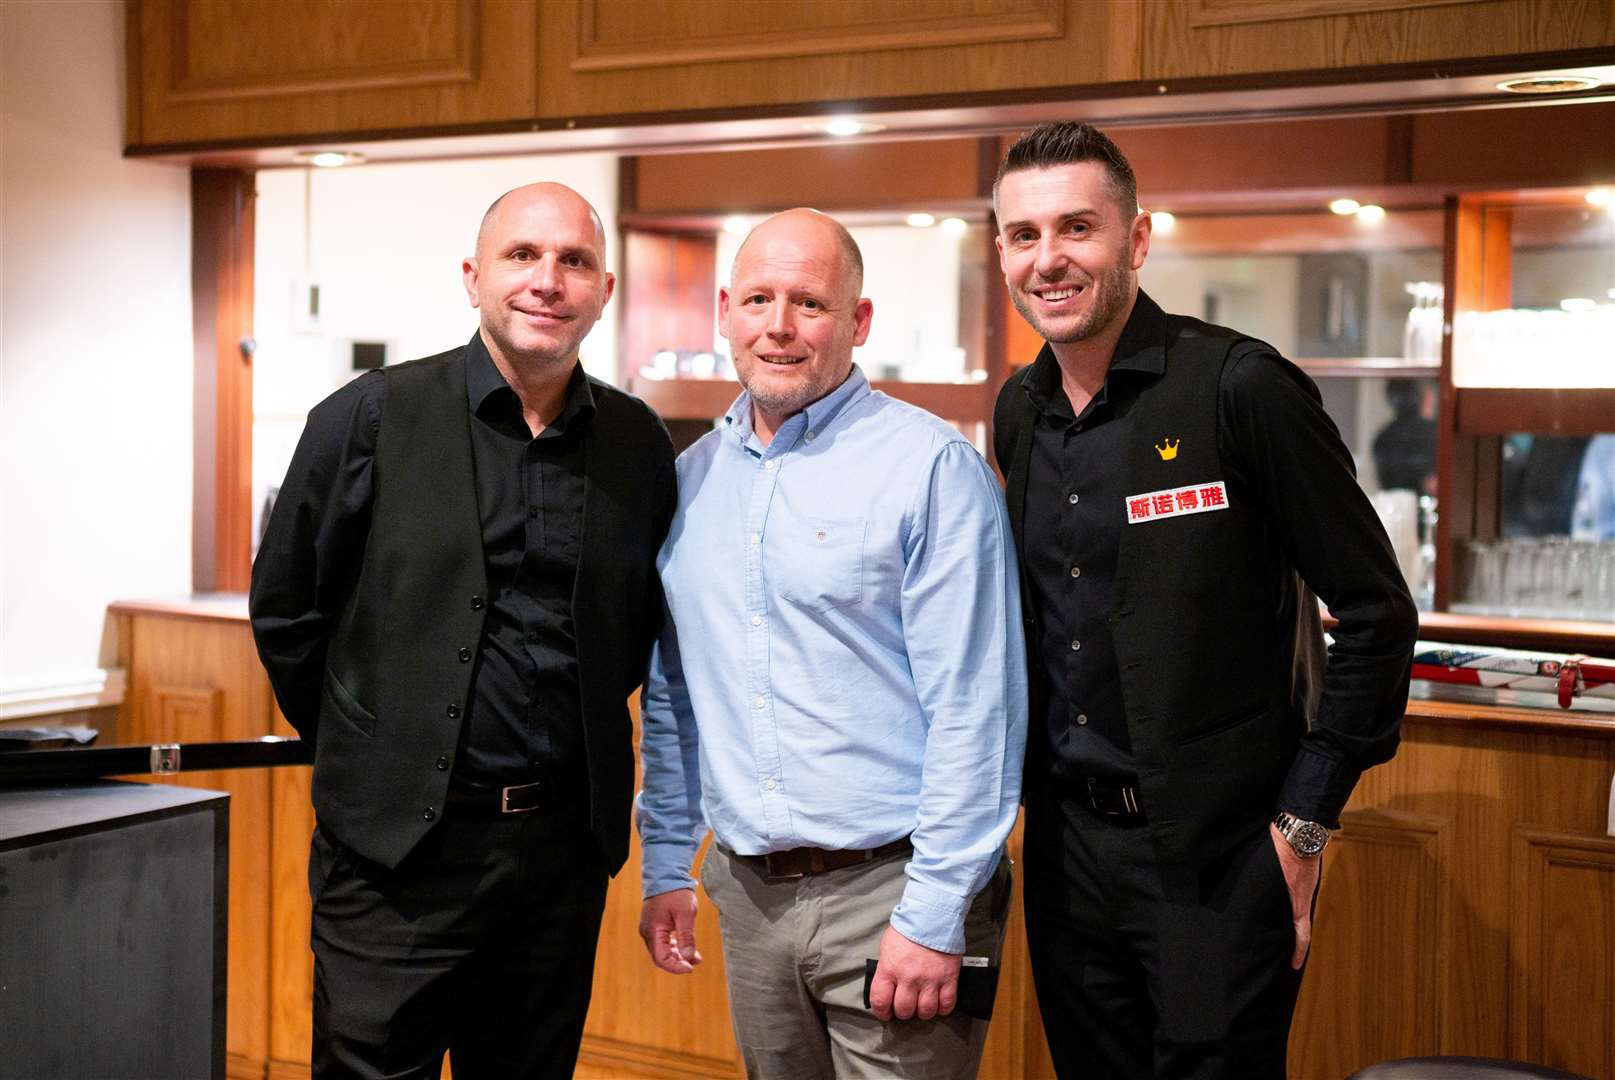 An evening of snooker with Mark Selby and Joe Perry at Lynn. Picture: Ian Burt